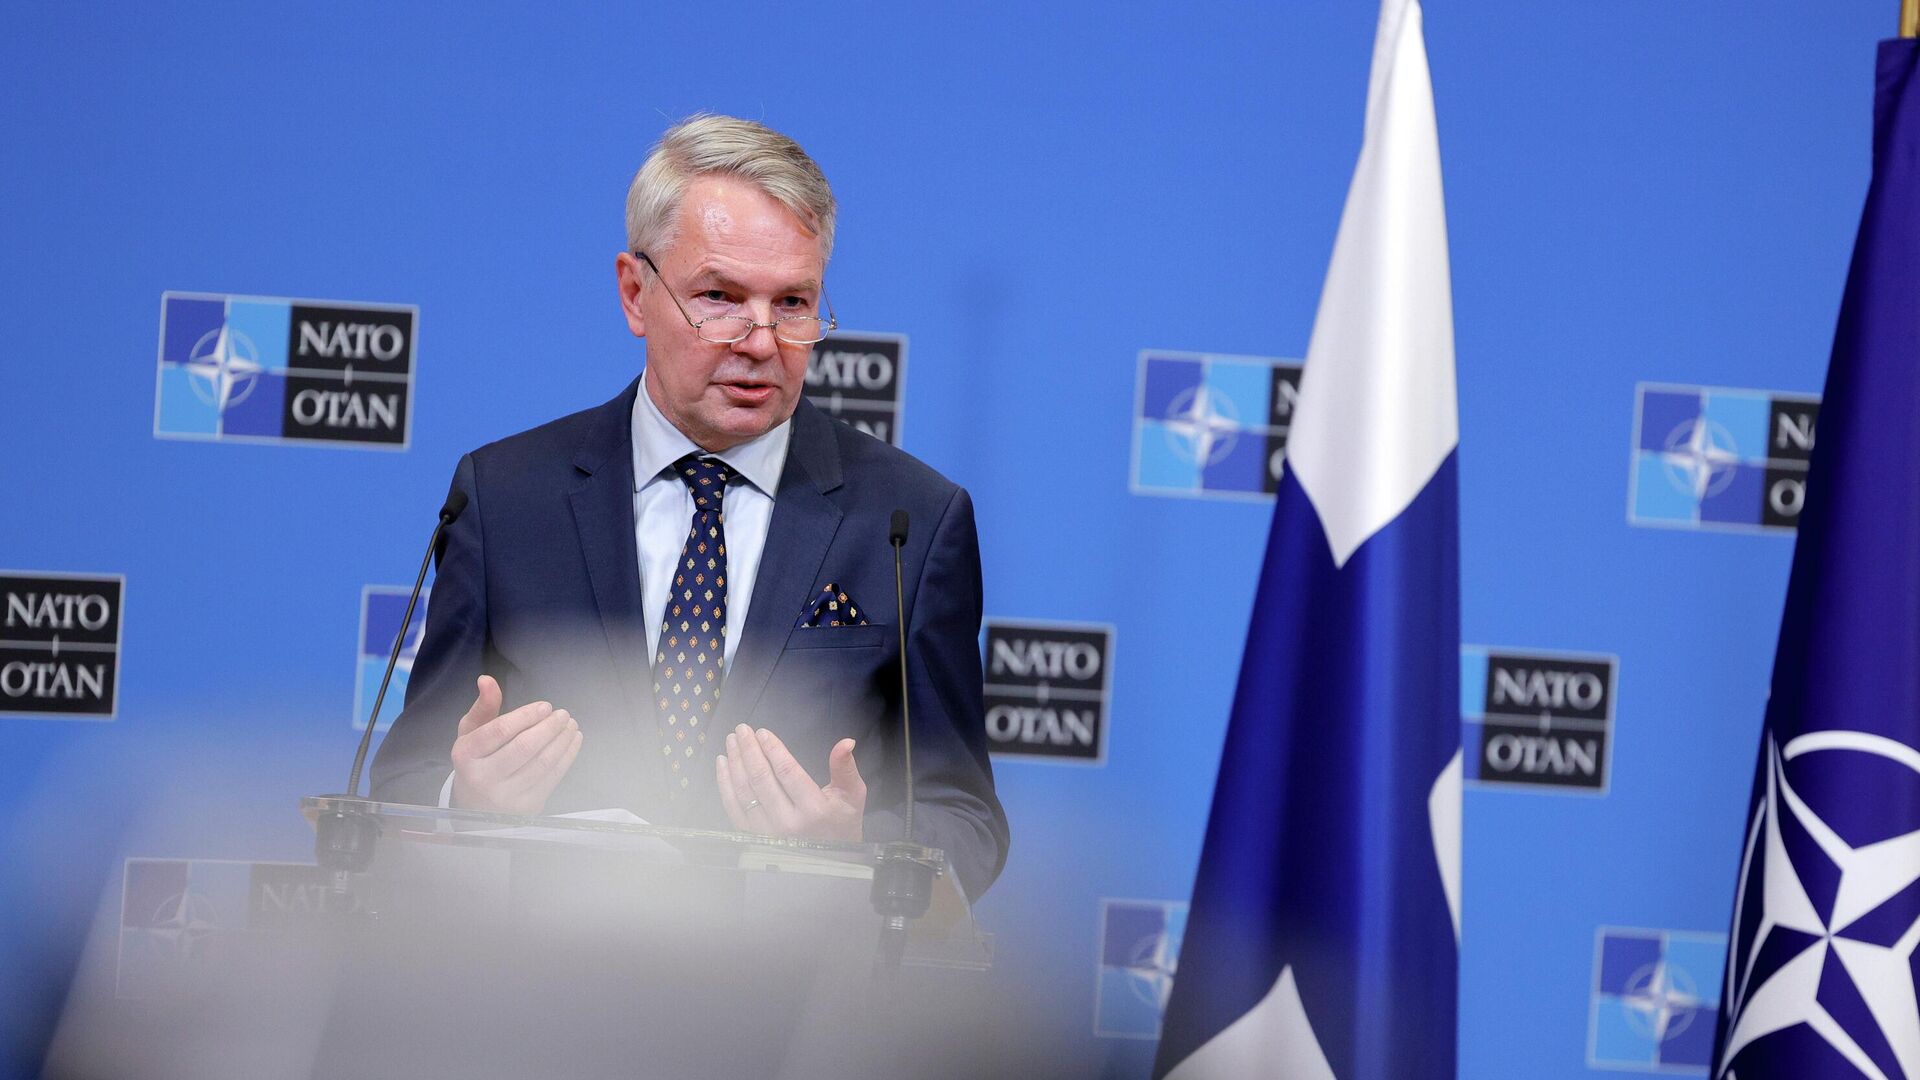 Finland's Foreign Minister Pekka Haavisto speaks during a media conference at NATO headquarters in Brussels, Monday, Jan. 24, 2022. - Sputnik International, 1920, 11.05.2022